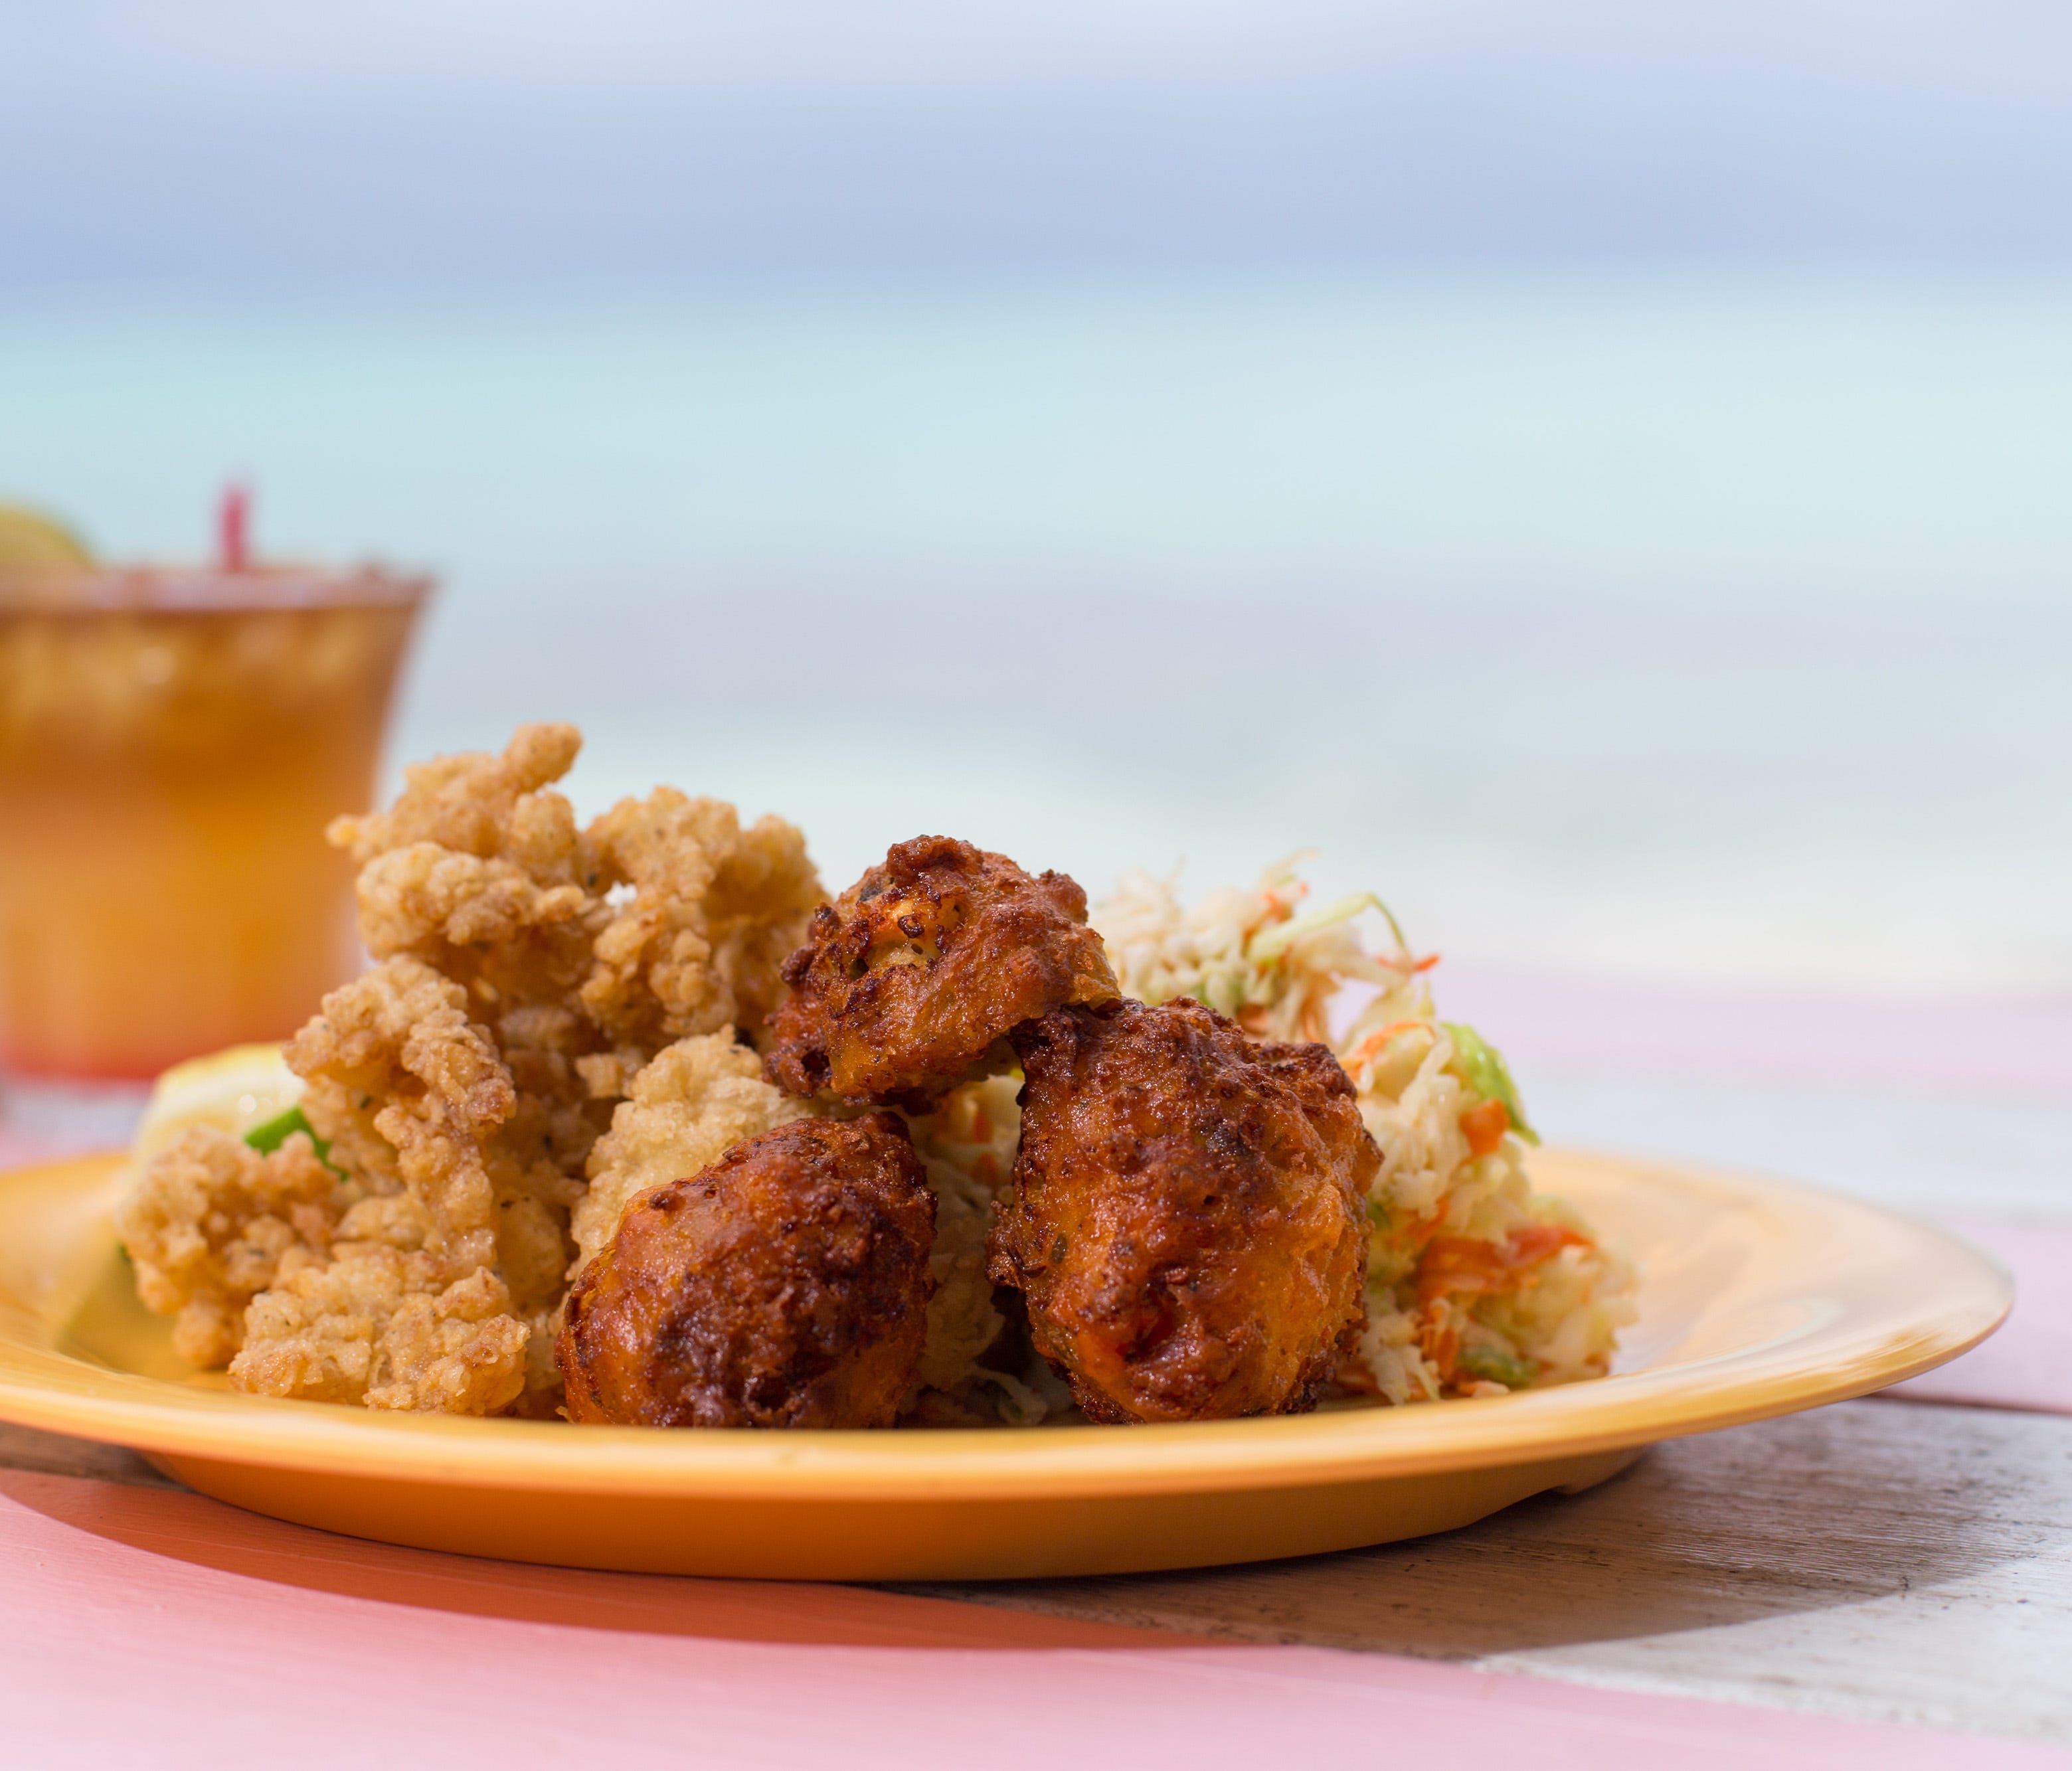 During TCI's annual Conch Festival, local chefs outdo themselves dishing up conch prepared in inventive ways.